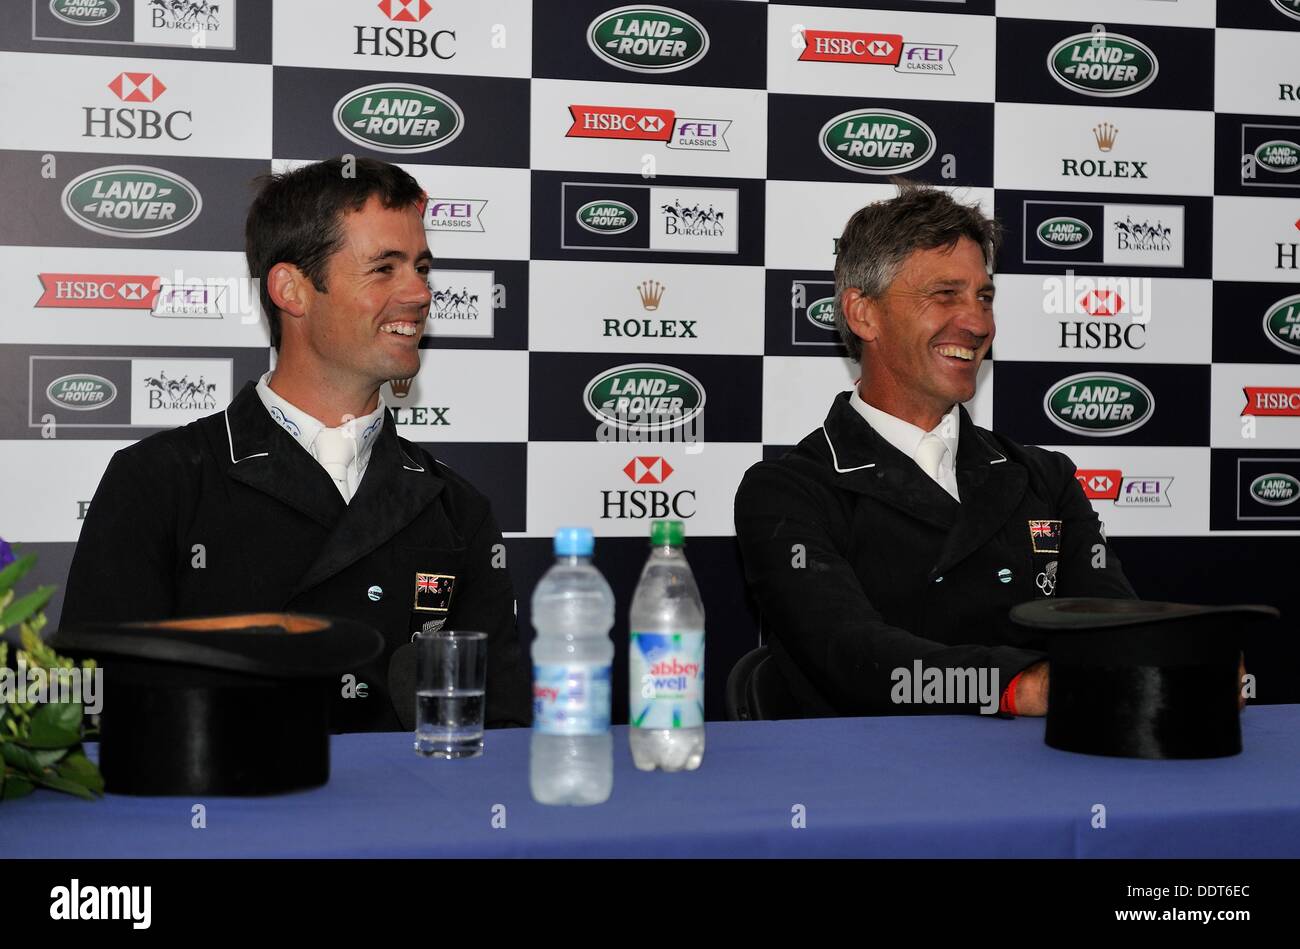 Burghley Horse Trials, Stamford, Lincolnshire, UK. 6th September 2013.  Jonathan Paget [NZL] & Andrew Nicholson [NZL] share a joke at the press conference after the  second day of The 2013 Land Rover Burghley Horse Trials.  Paget is in first place and Nicholson third going into Saturday's cross country phase. The Land Rover Burghley Horse Trials take place between 5th - 8th September at Burghley House, Stamford. Stephen Bartholomew/Stephen Bartholomew Photography/Alamy Live News Stock Photo